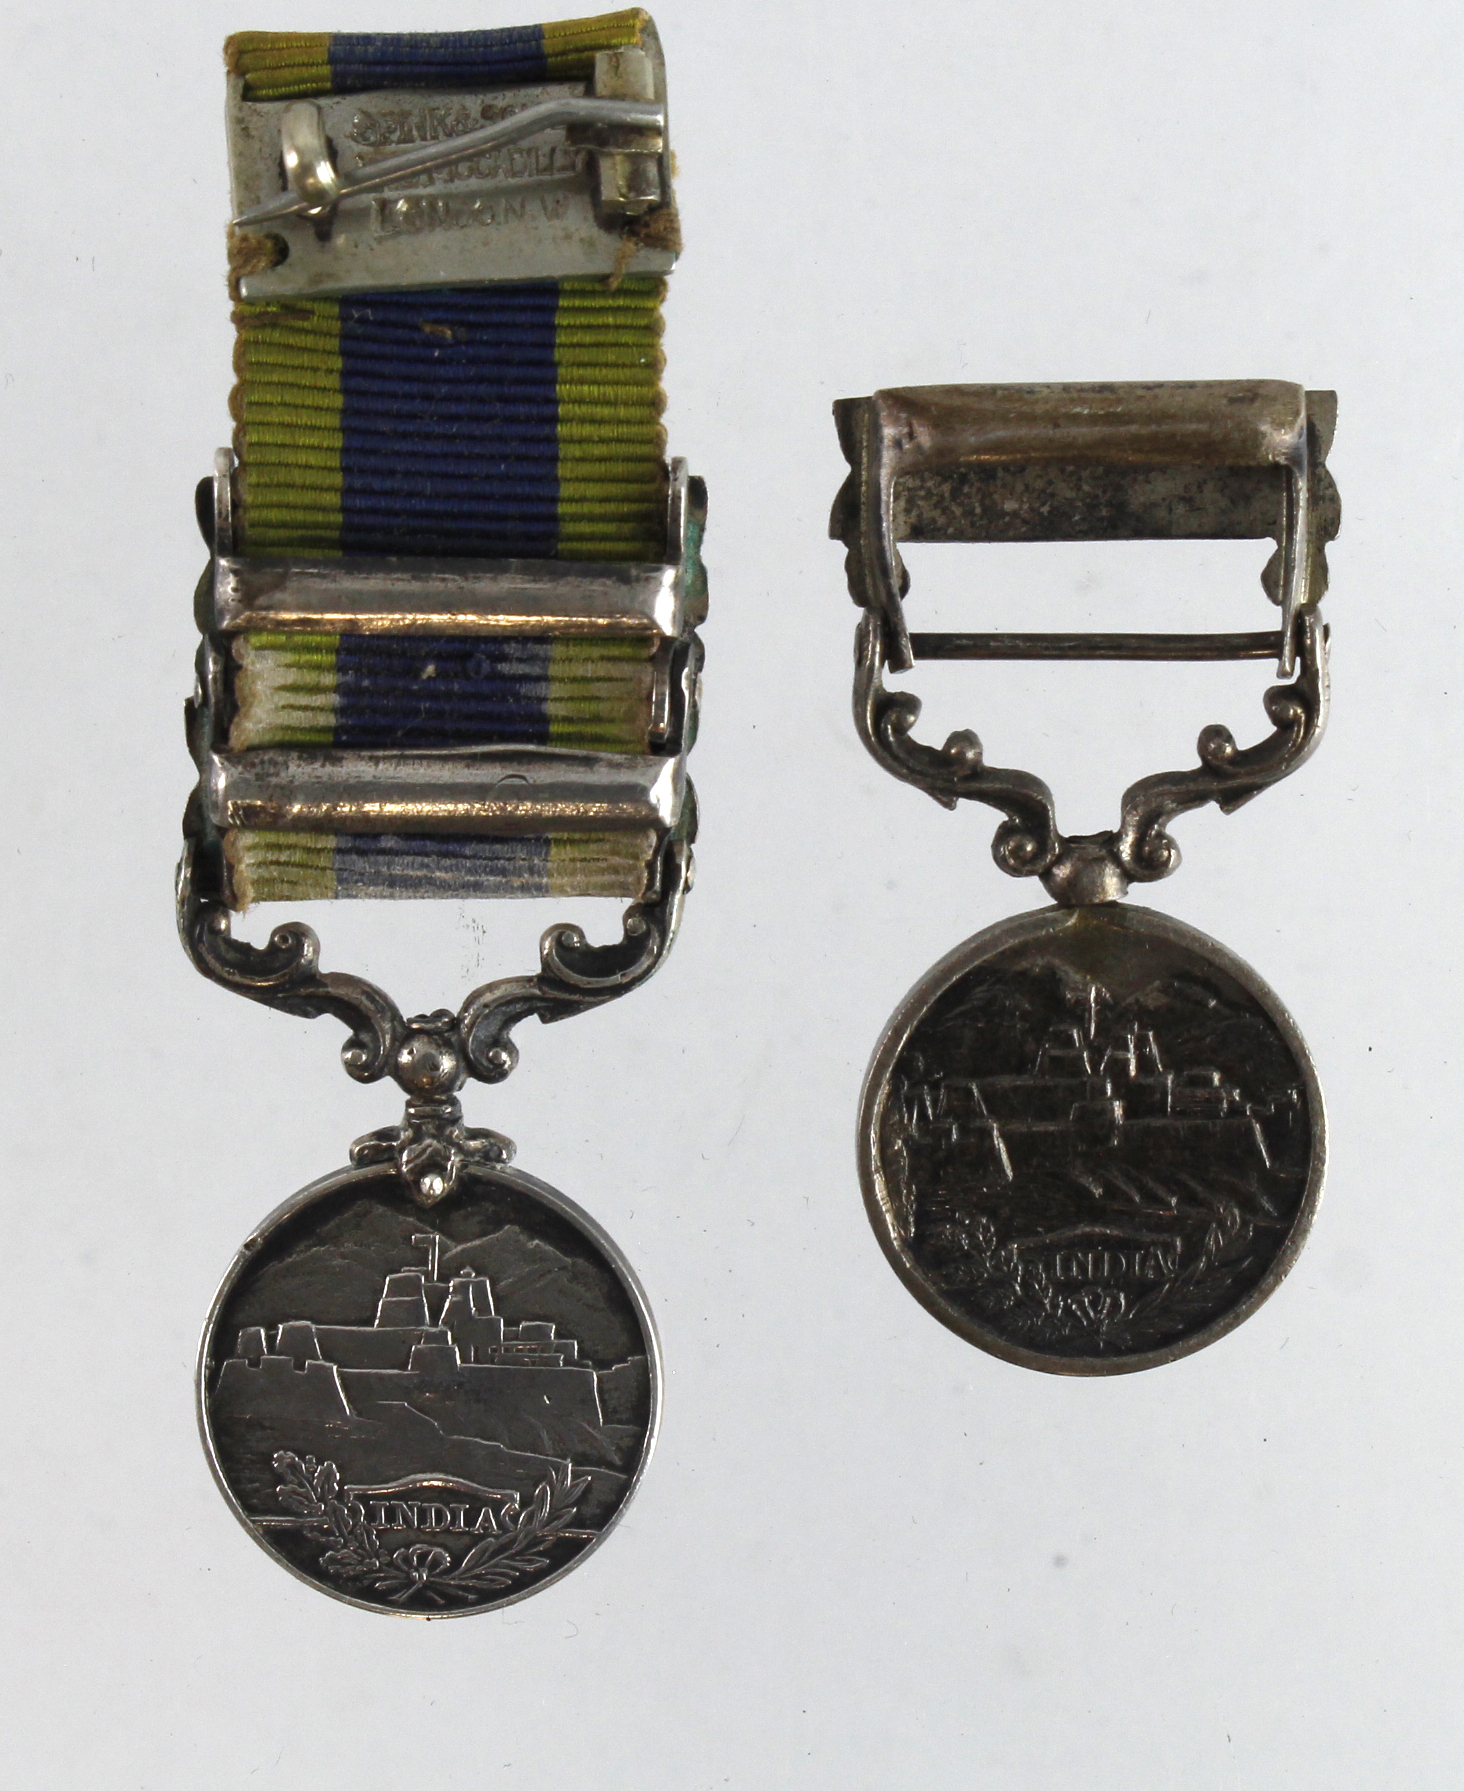 Minature Medals - IGS GV with bar Waziristan 1919-21, and another IGS with bars Afganistan NWF - Image 2 of 2